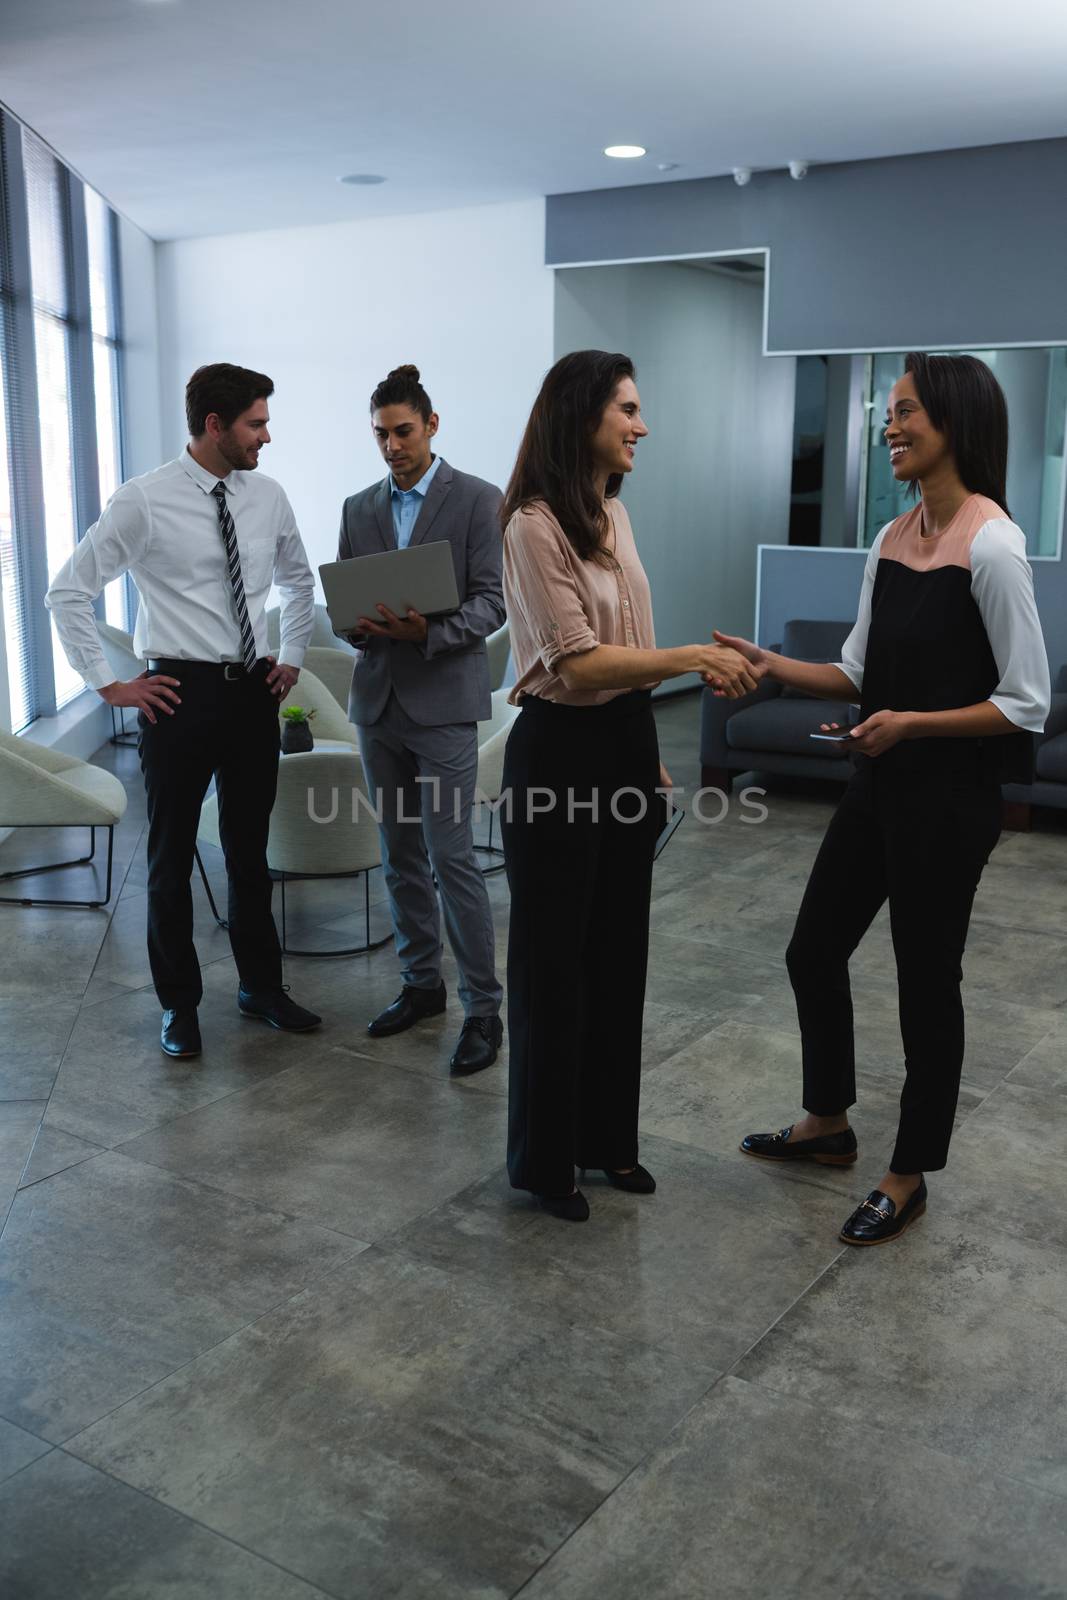 Business colleagues interacting with each other in office